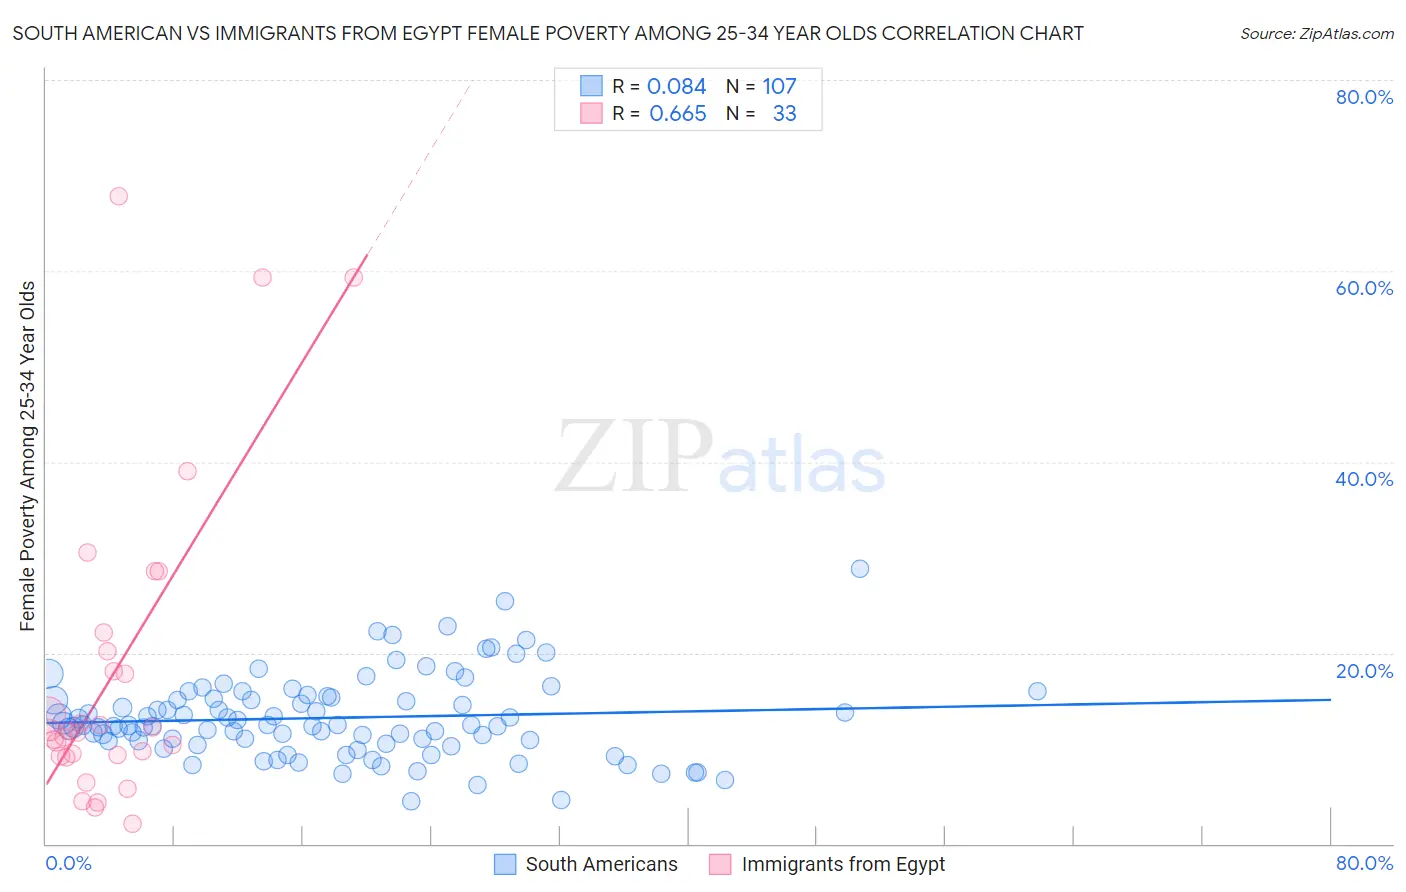 South American vs Immigrants from Egypt Female Poverty Among 25-34 Year Olds